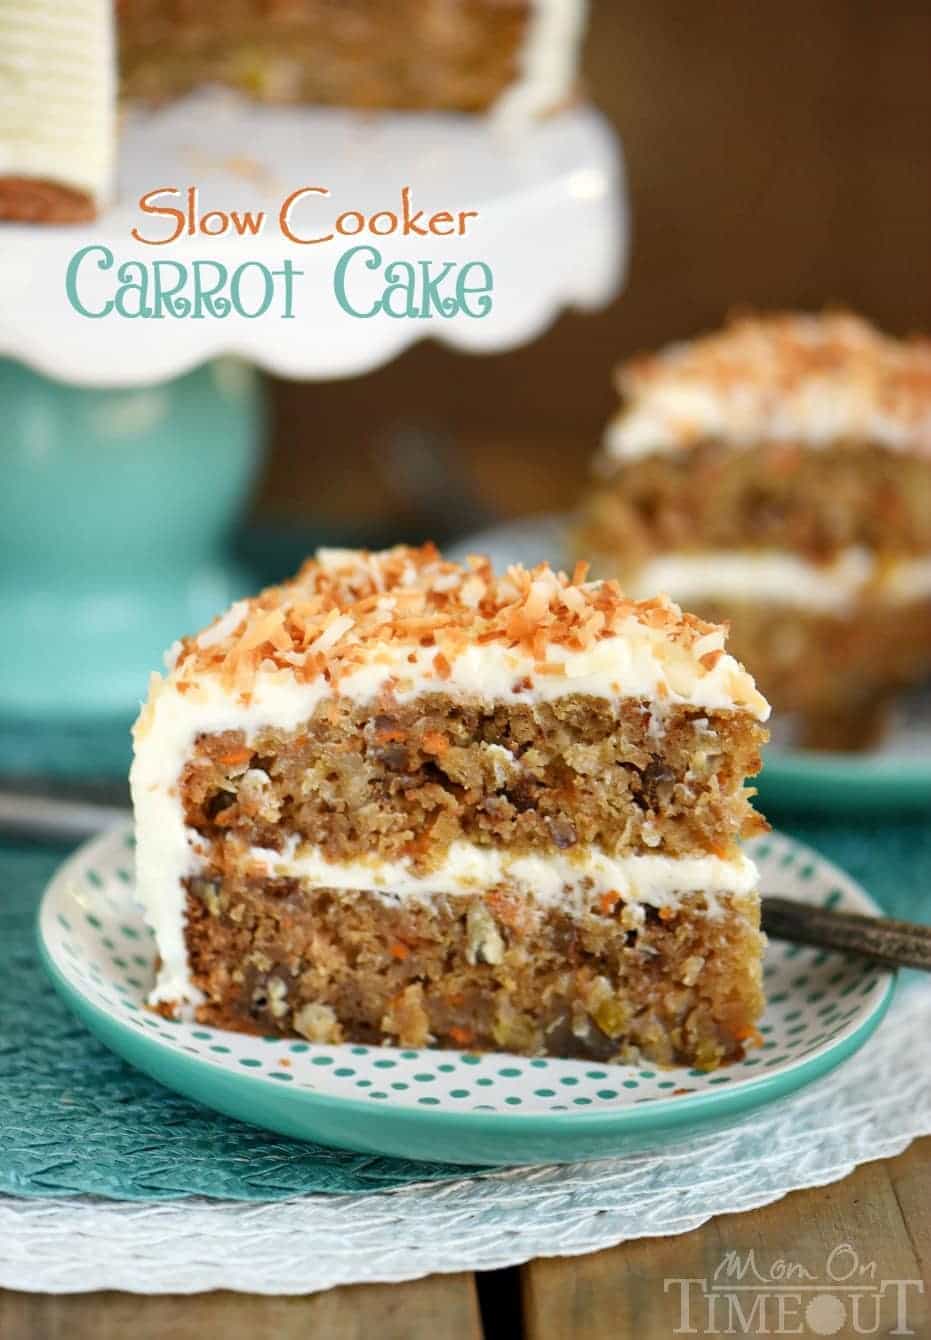 This Slow Cooker Carrot Cake with Cream Cheese Frosting is going to change your life! Free up the oven and get the moistest carrot cake you've ever had - right from your slow cooker! Made without oil or butter and loaded with coconut, pineapple and pecans!